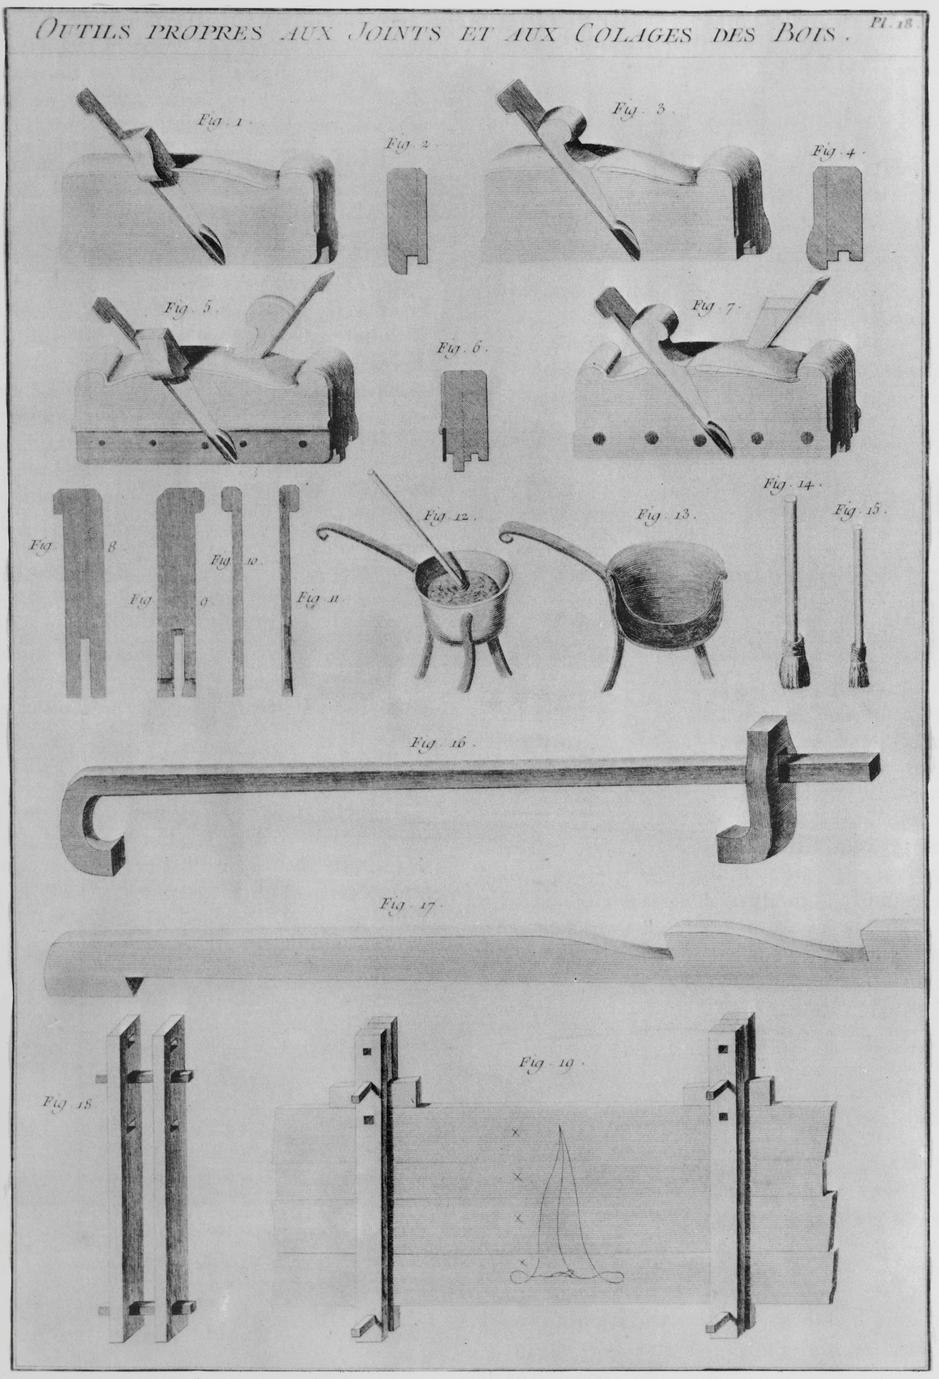 Print with several drawings of tools.